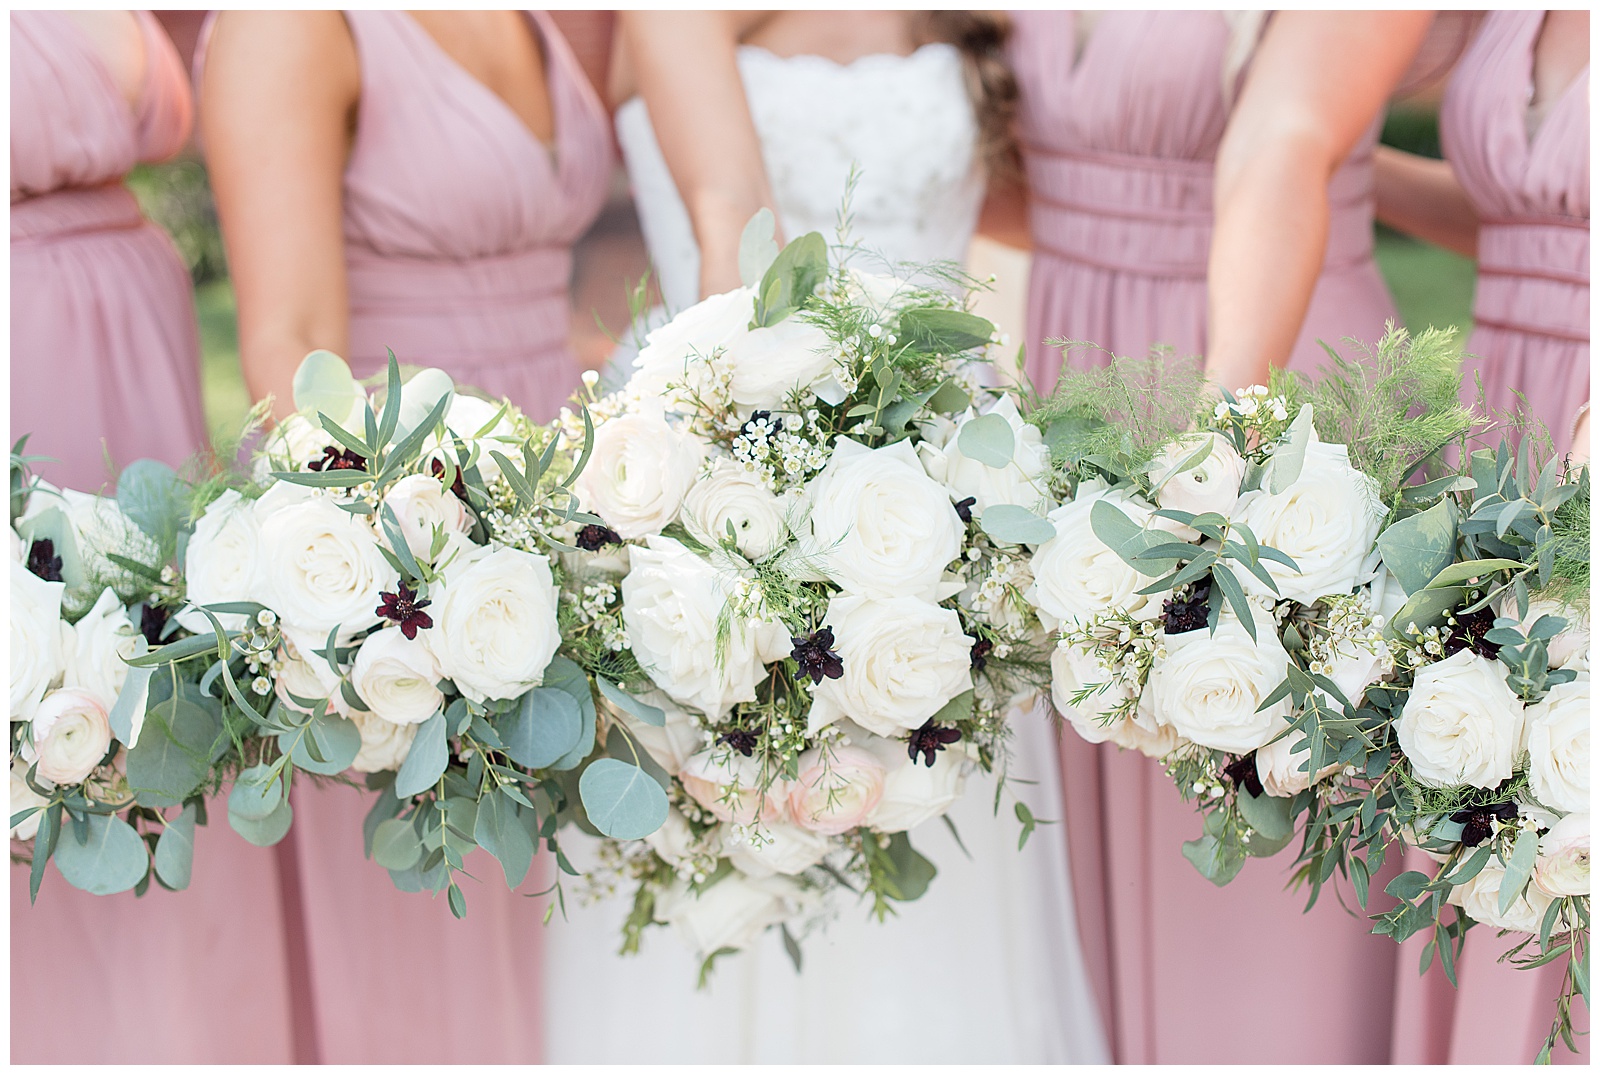 close up of bride with bridesmaids in mauve dresses displaying their bouquets of white flowers and eucalyptus